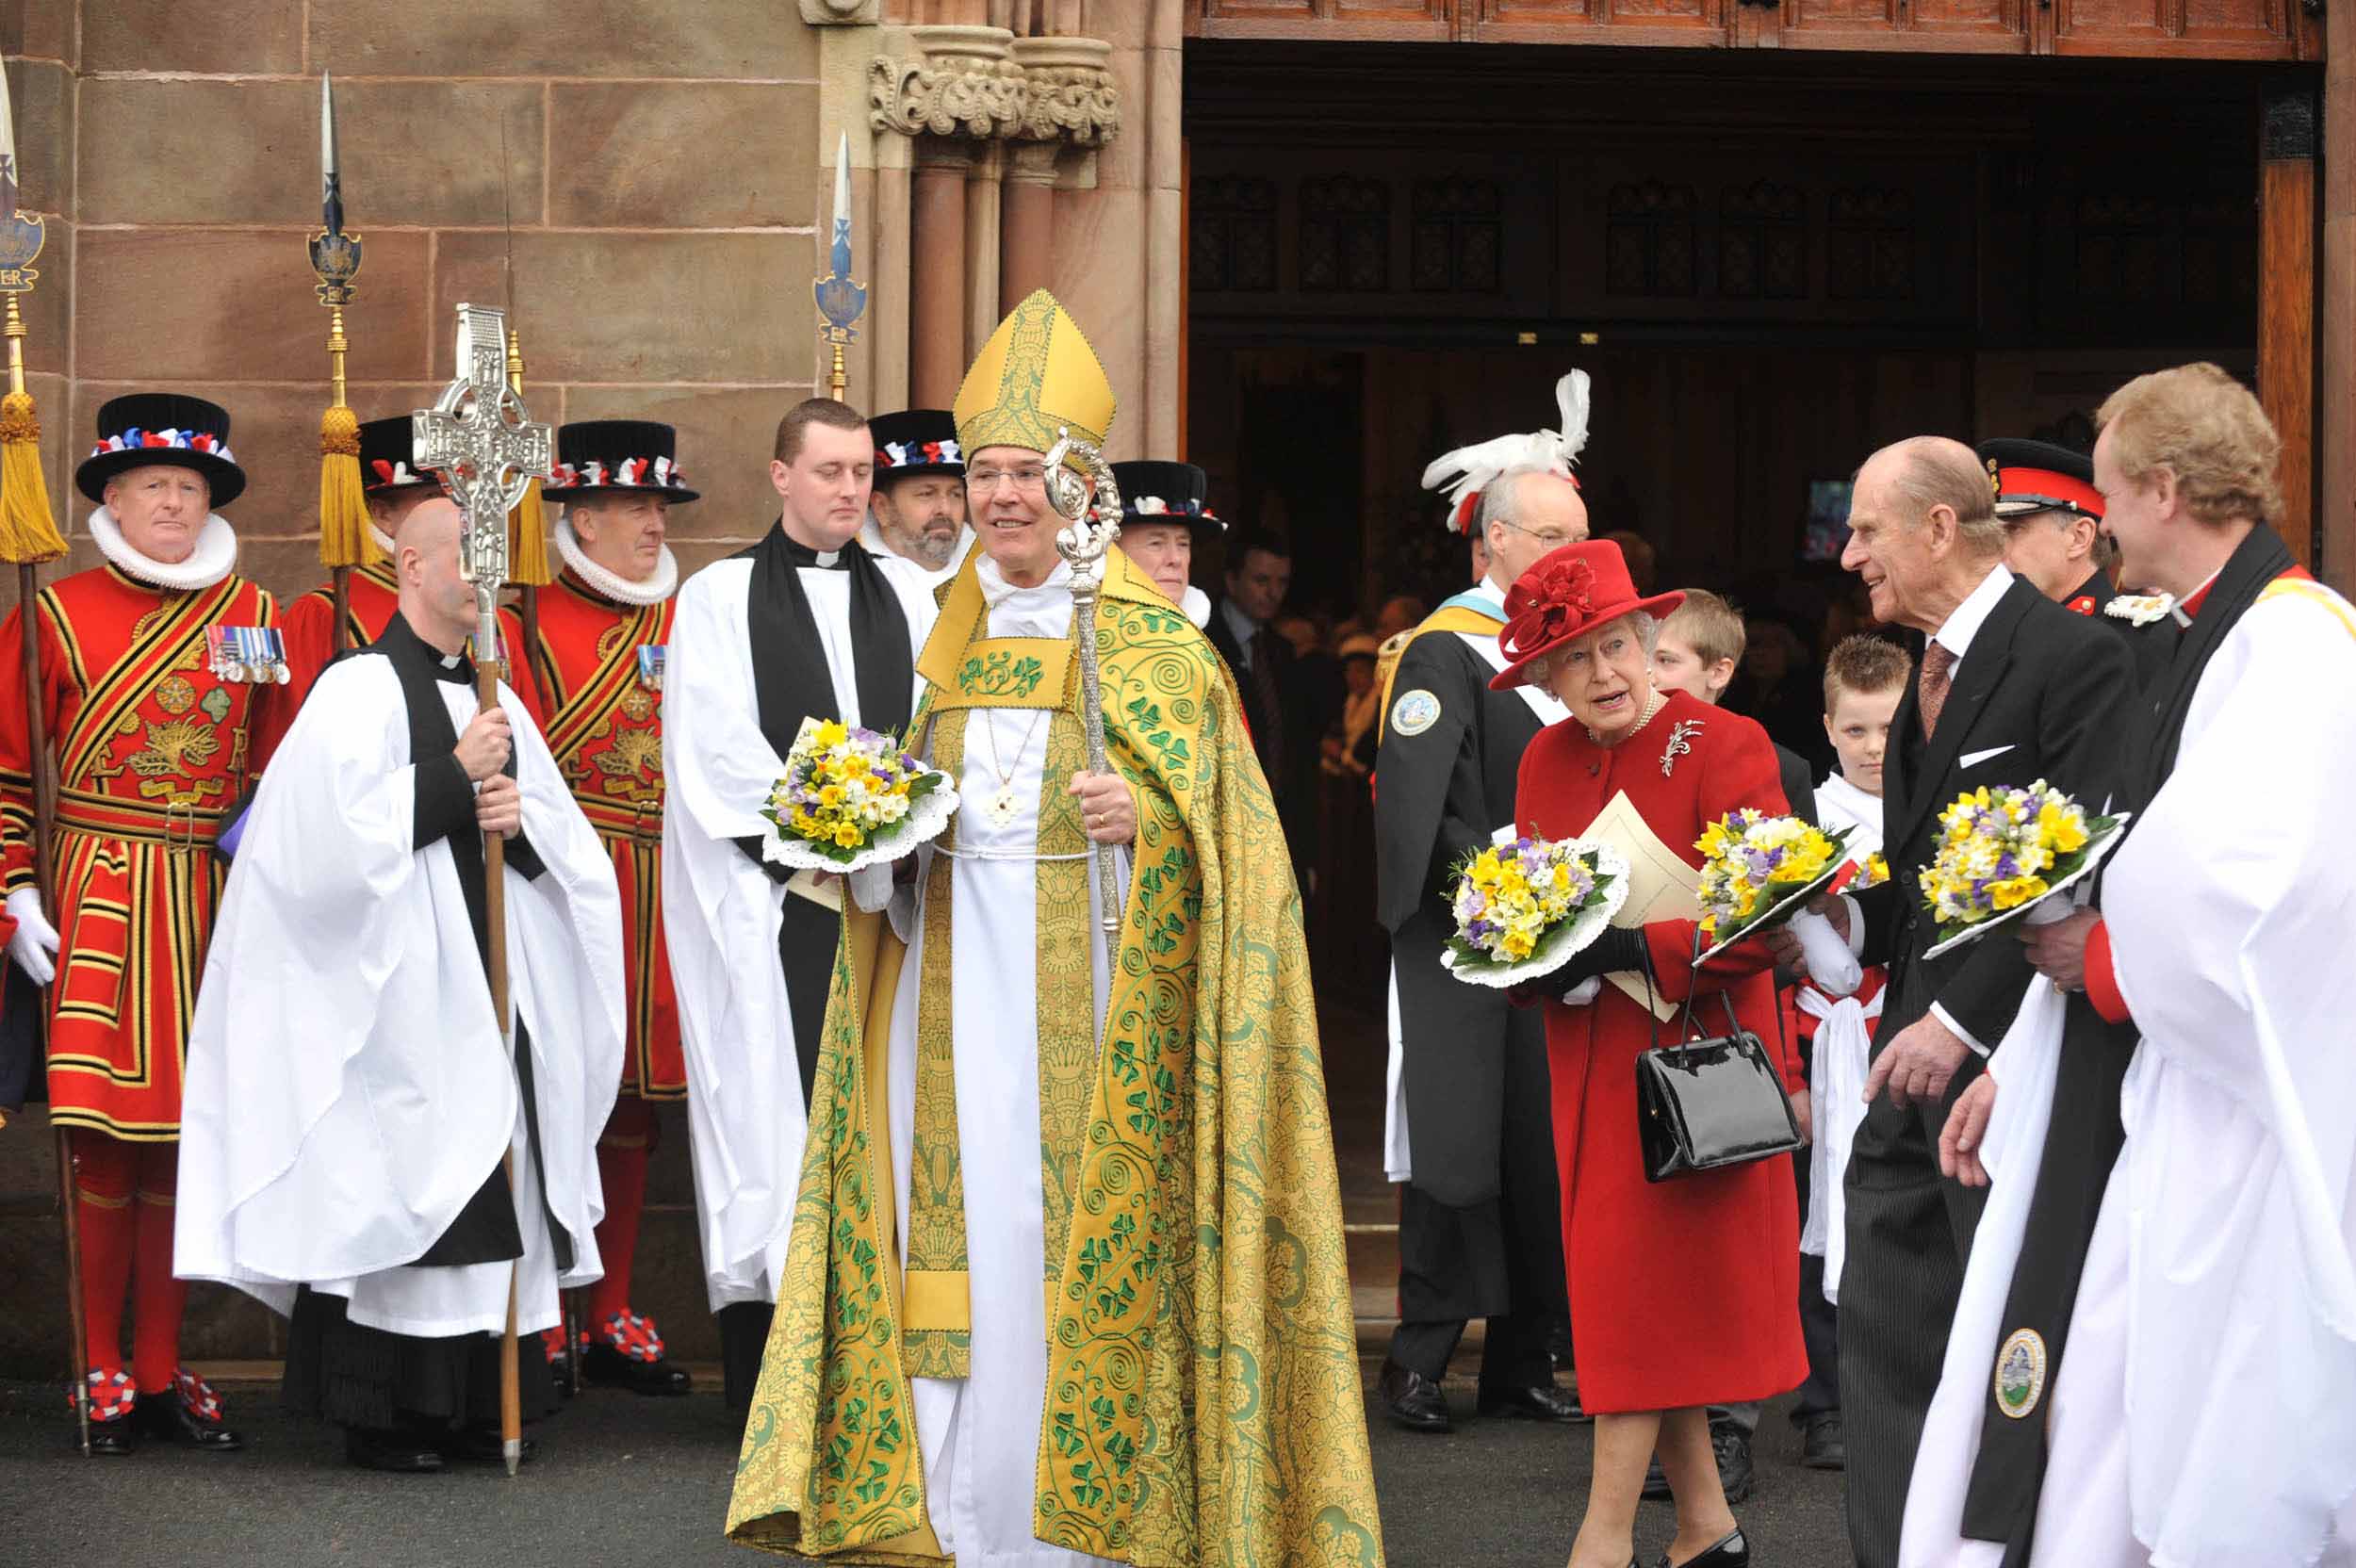 The Queen at the Maundy Service in Armagh, 2008.